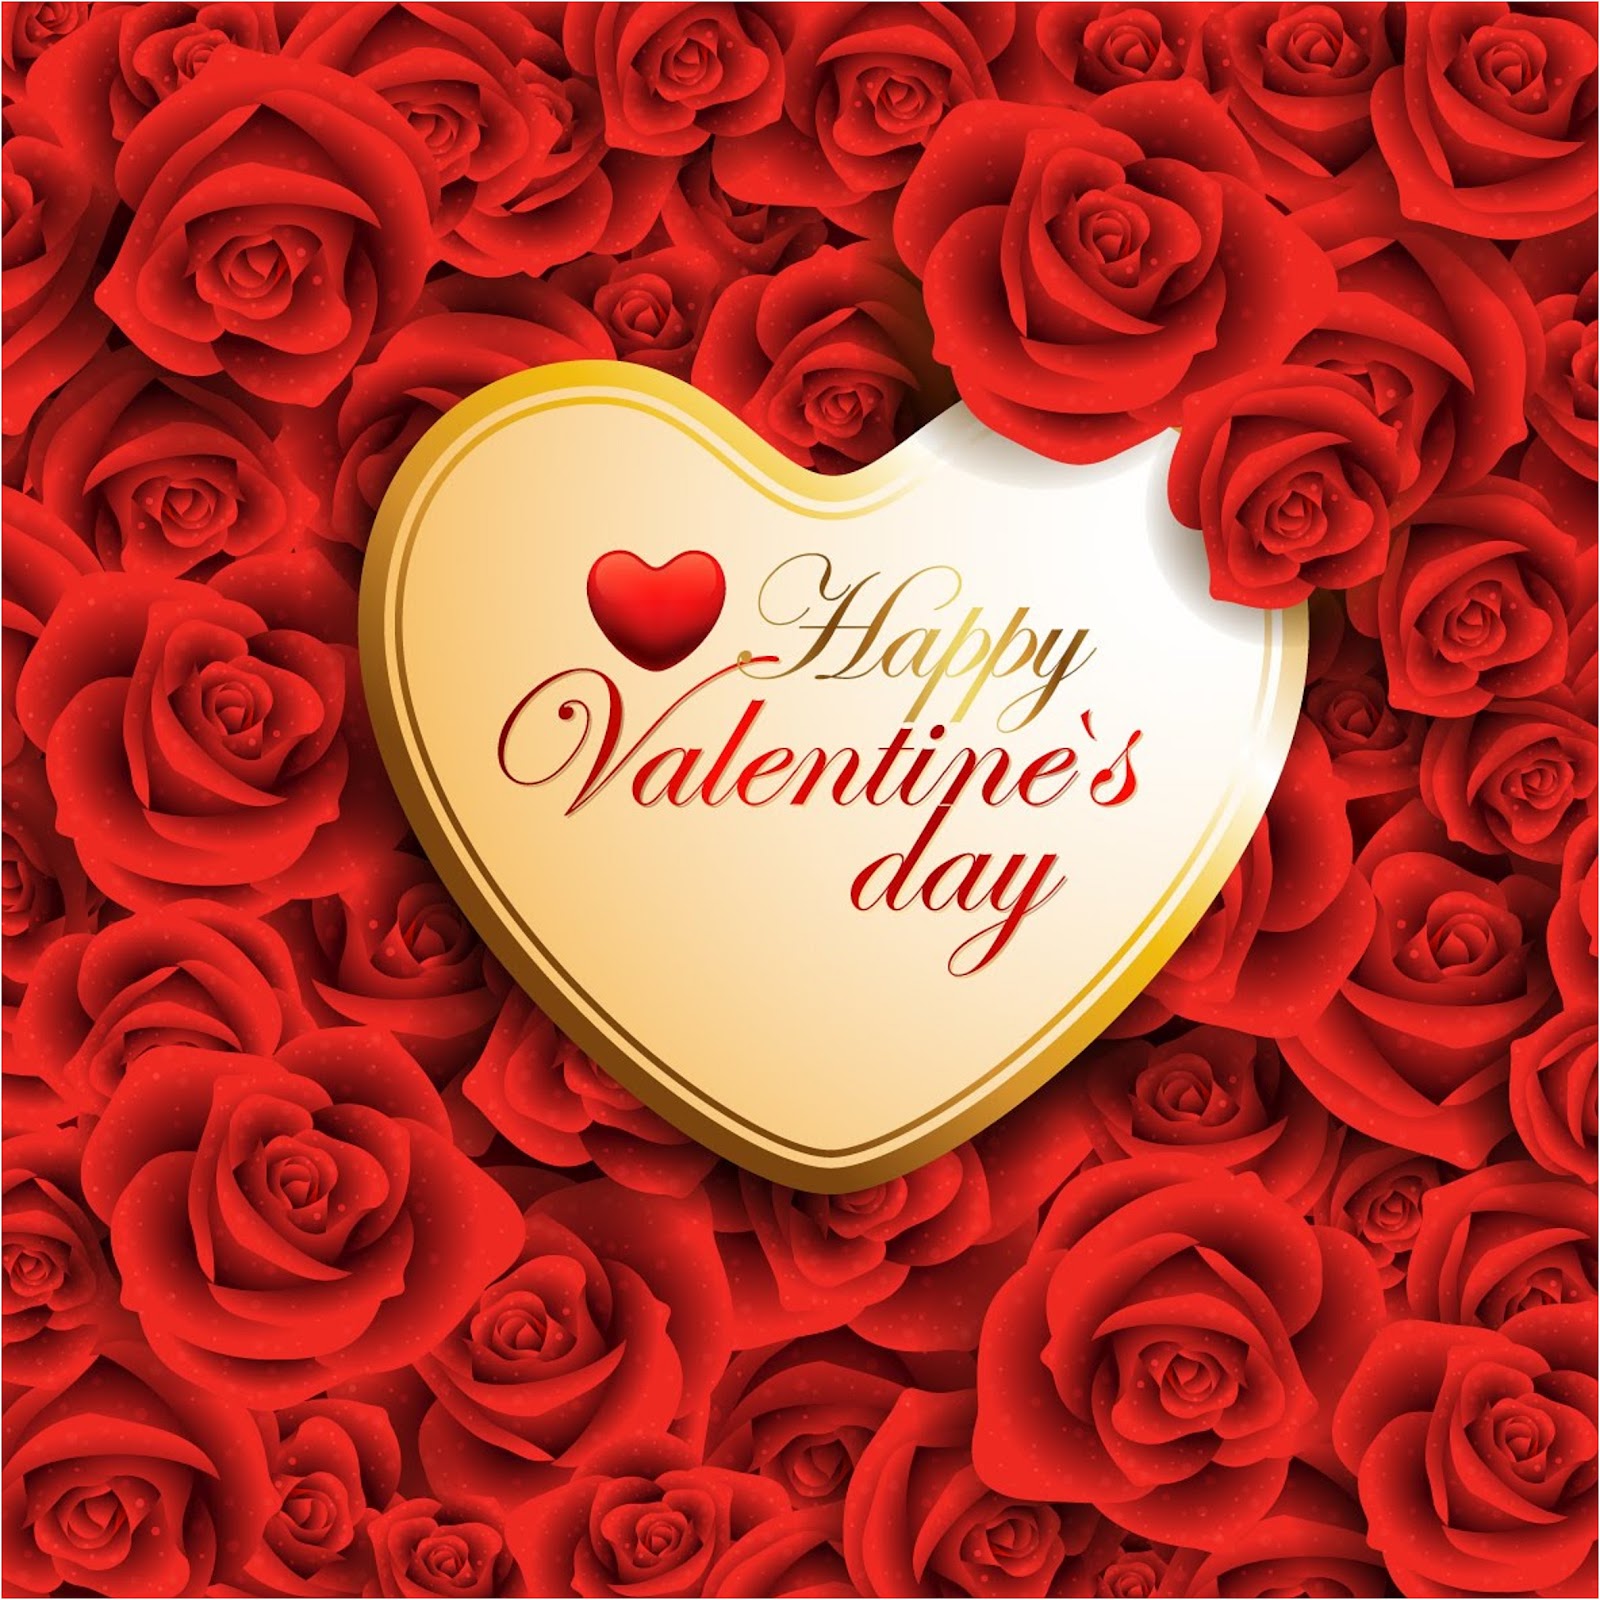 Actress, Puppy, Christmas, Pictures, Wallpaper 3D, Photos, Free Download: Valentine's Day